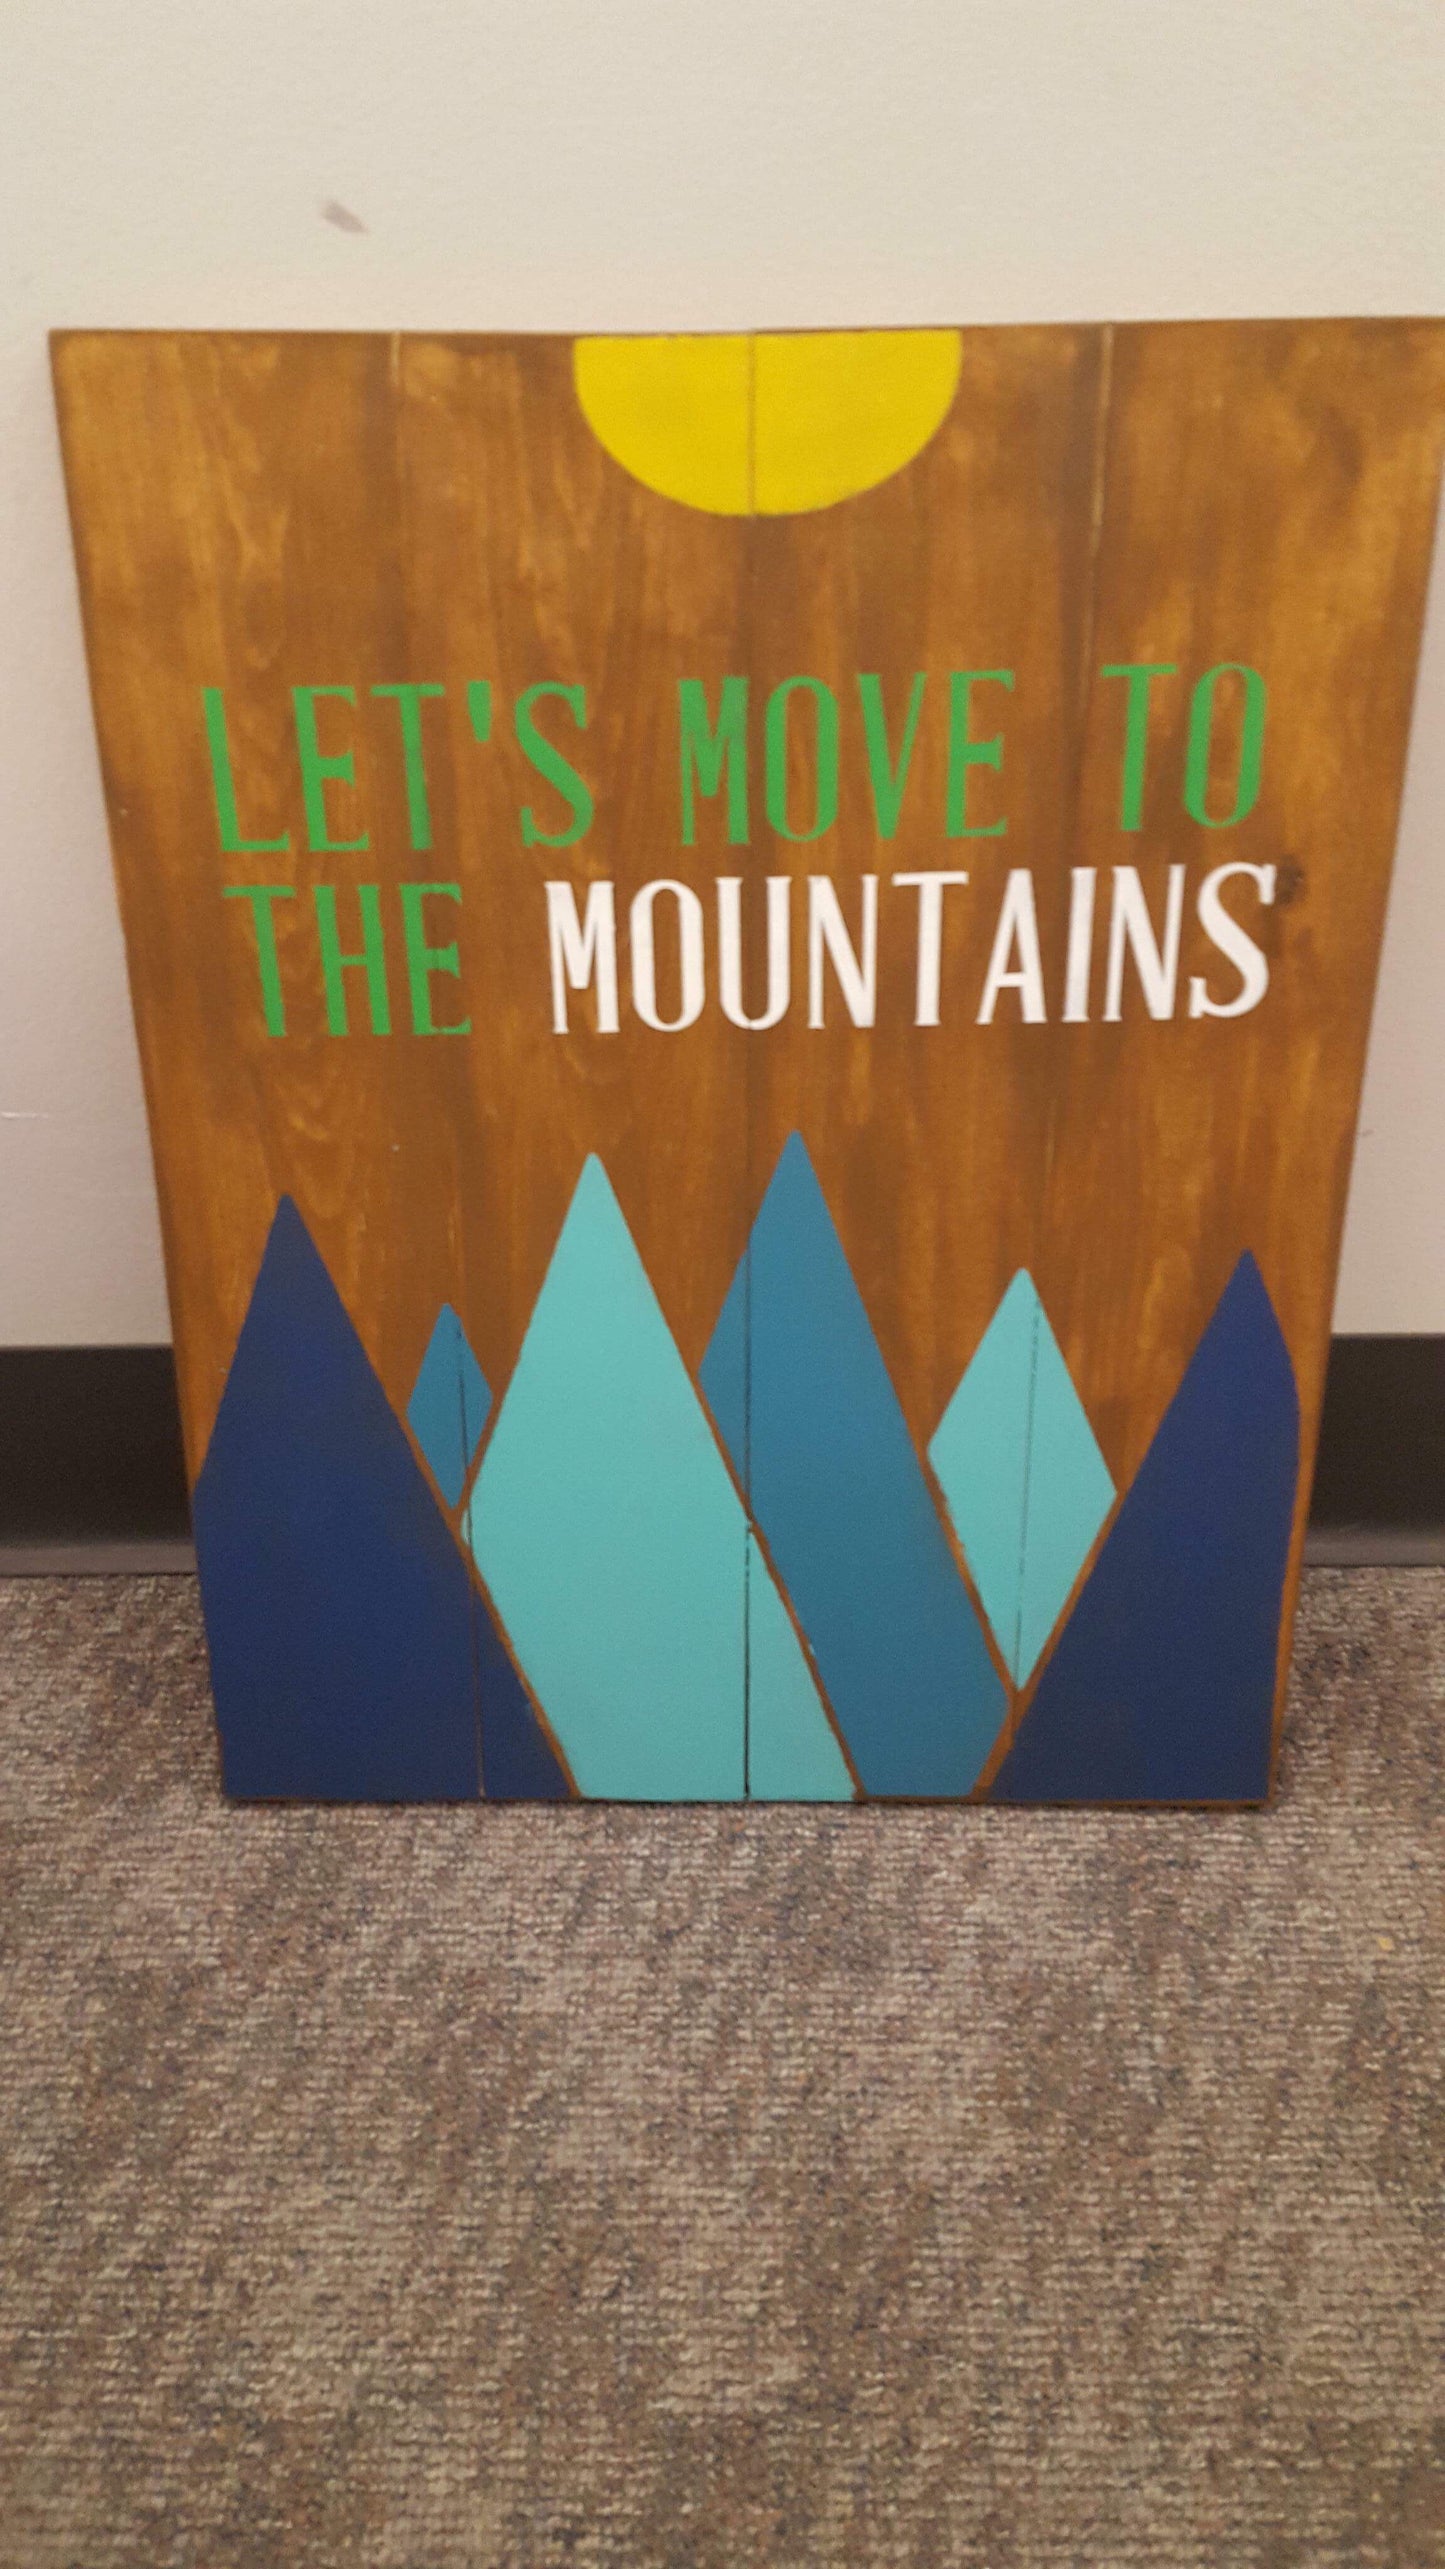 Lets move to the mountains